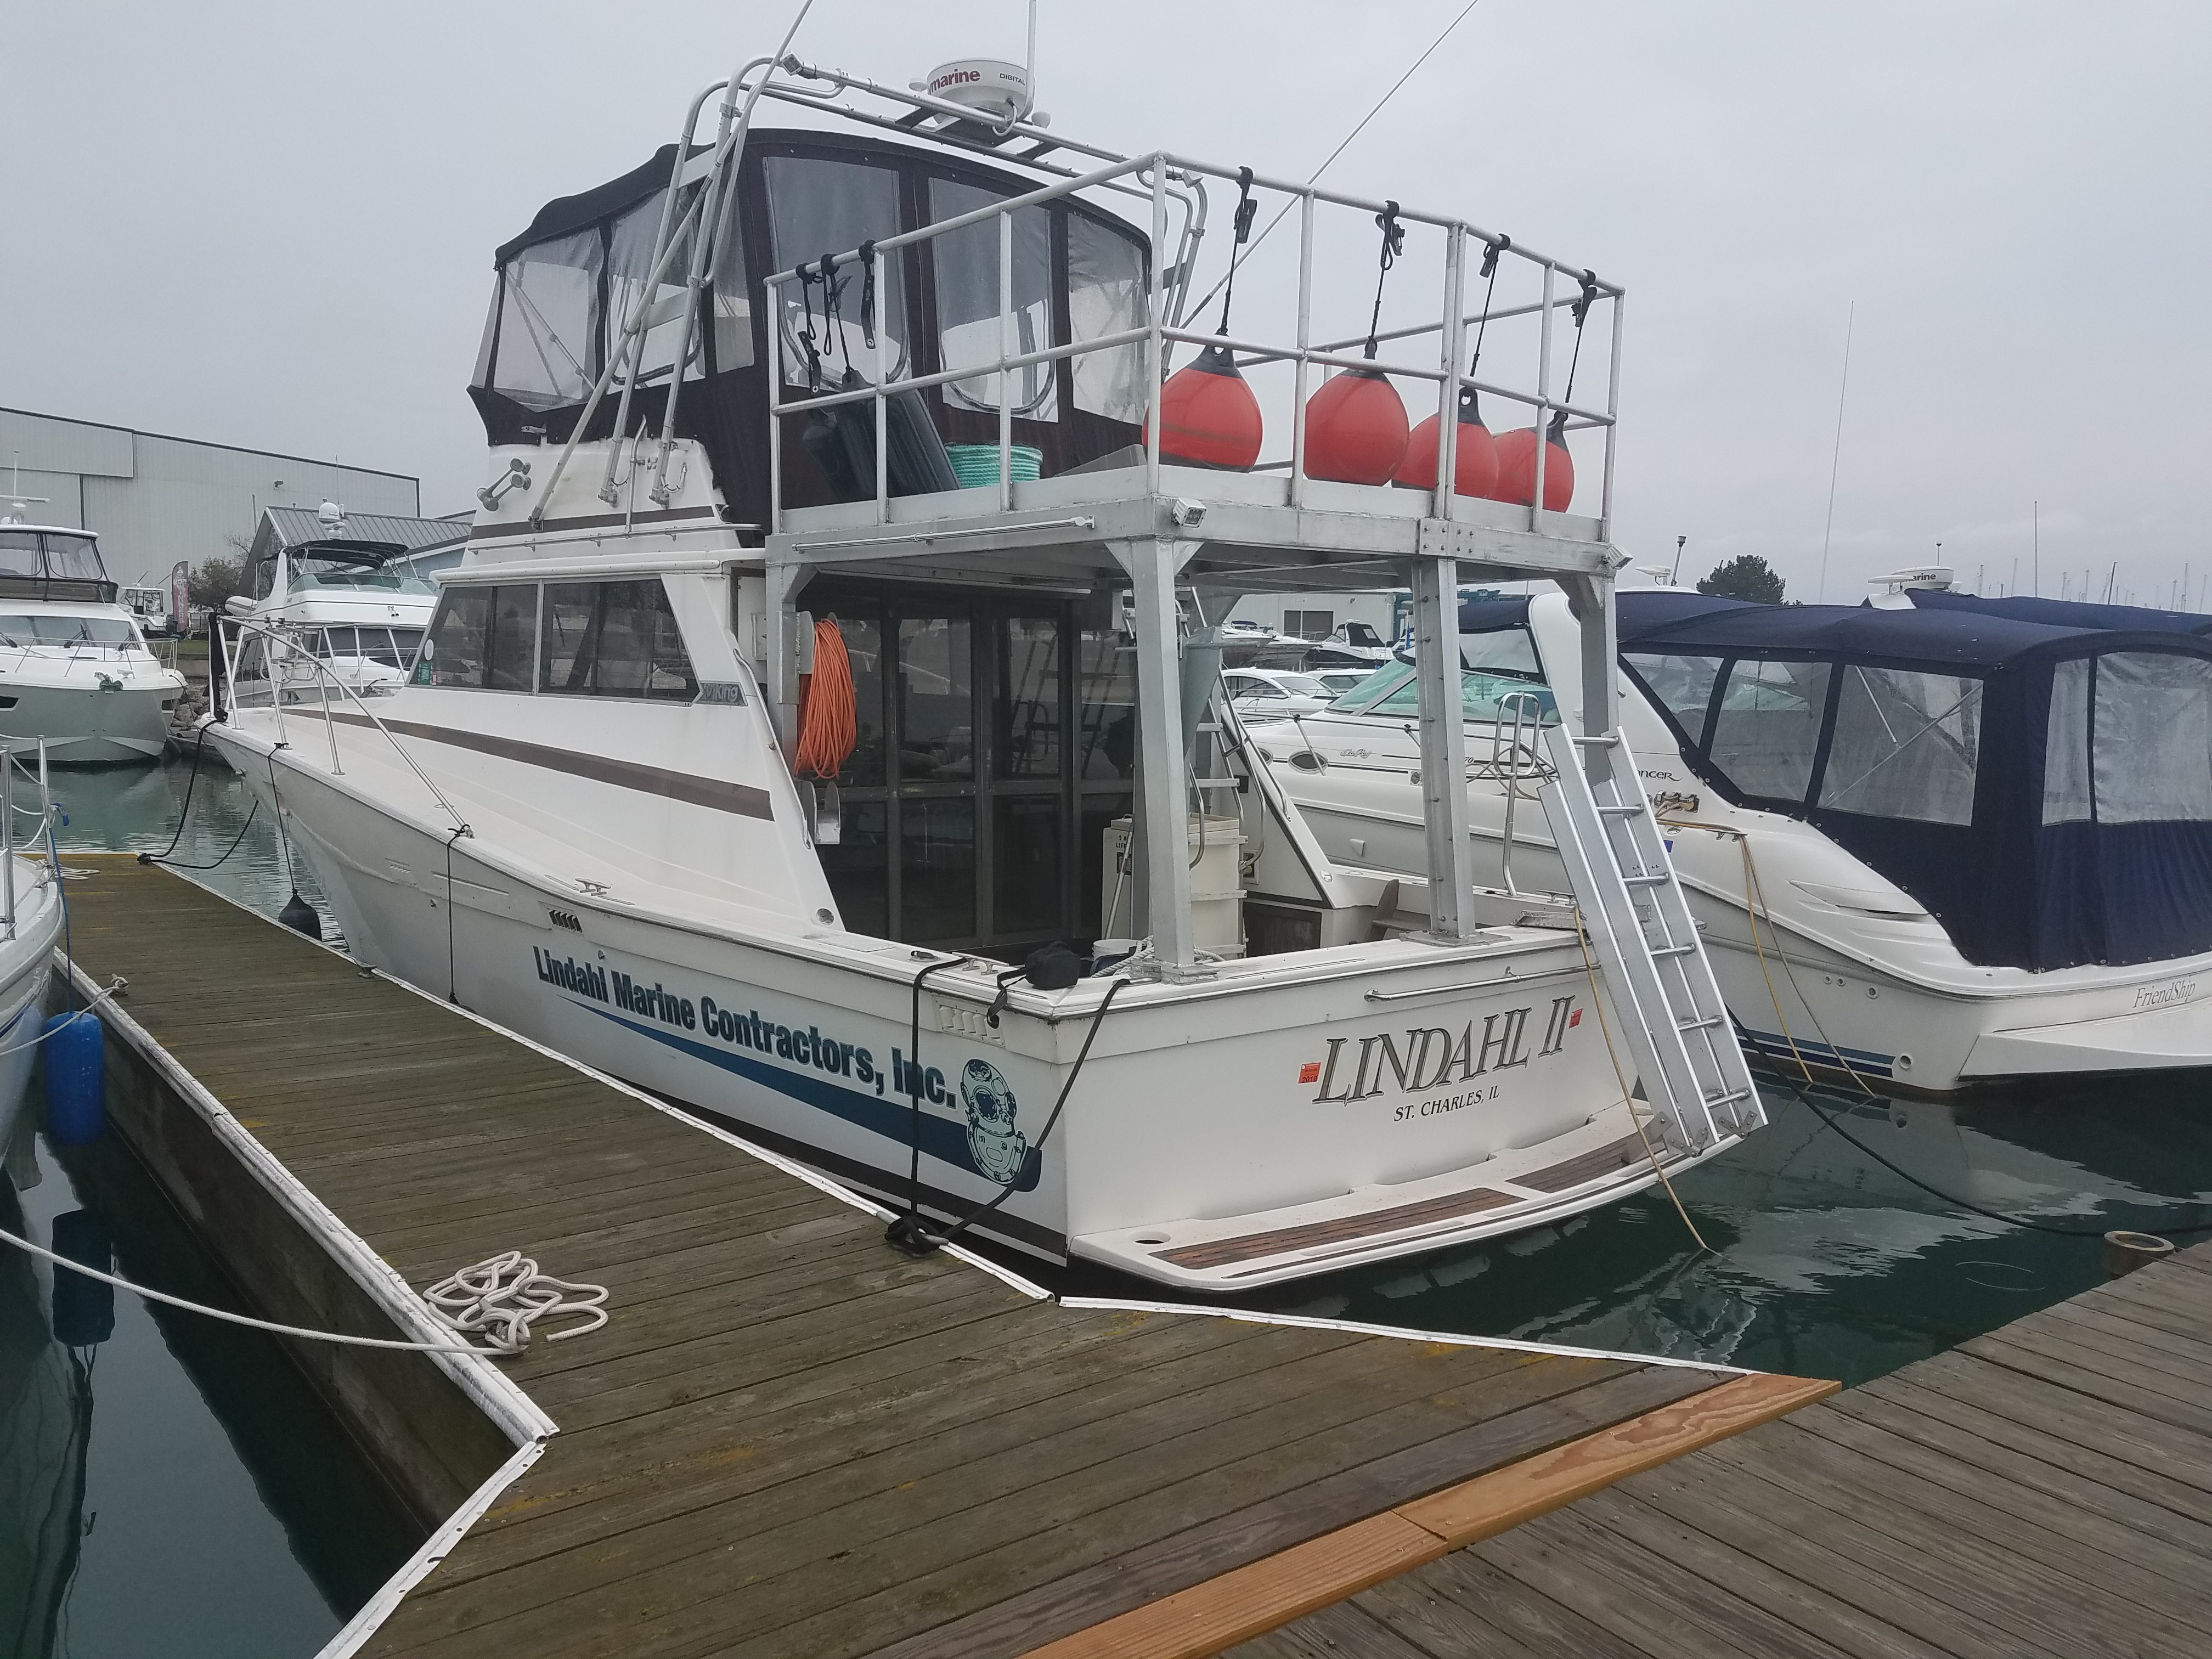 New 40' dive boat recently added to keep up with growing lake work. Custom boat equipped with work platform, updated electronics, and 50 inch monitor for viewing underwater activities